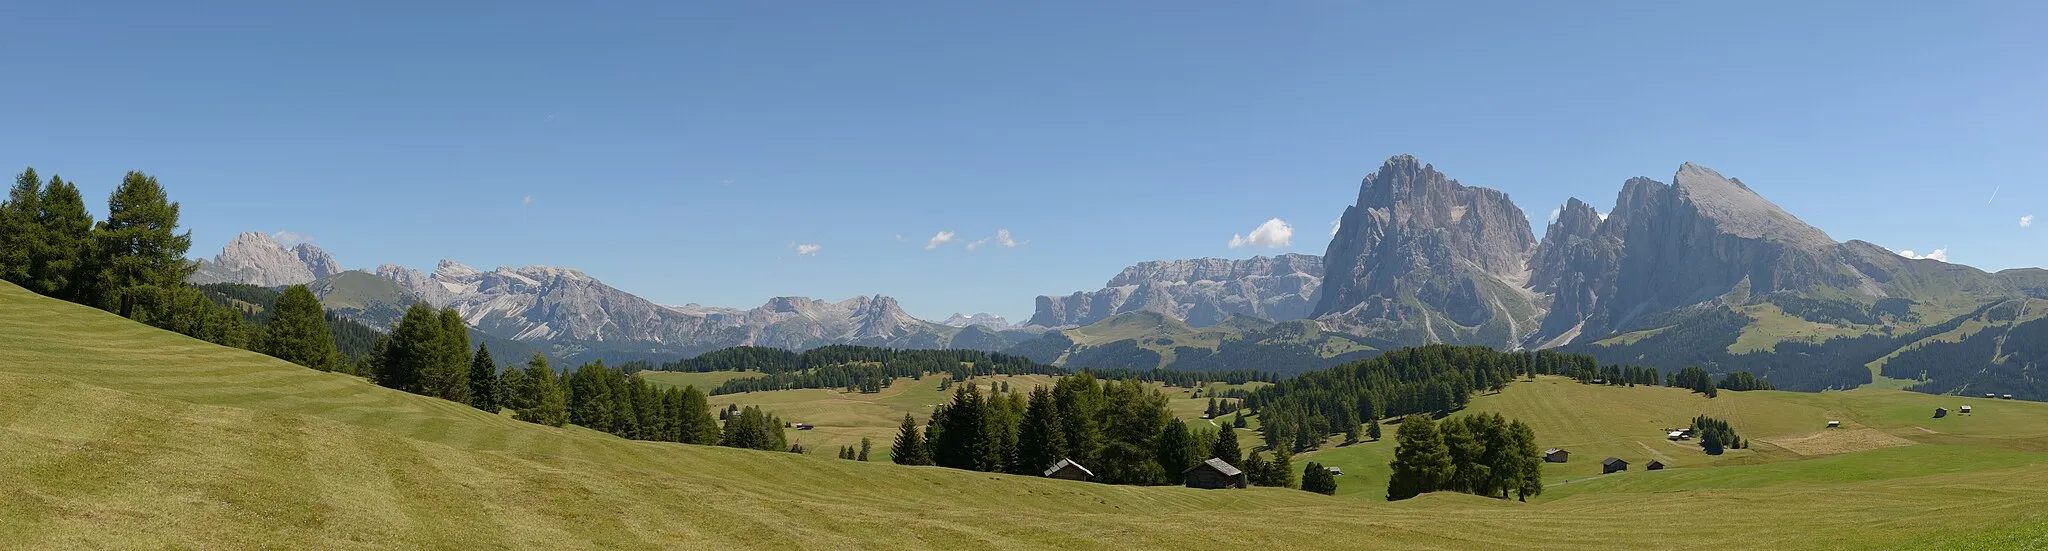 Photo showing: The Seiser Alm meadows in the back the mountains Odles Saslonch and Sella in Gröden, Dolomites.